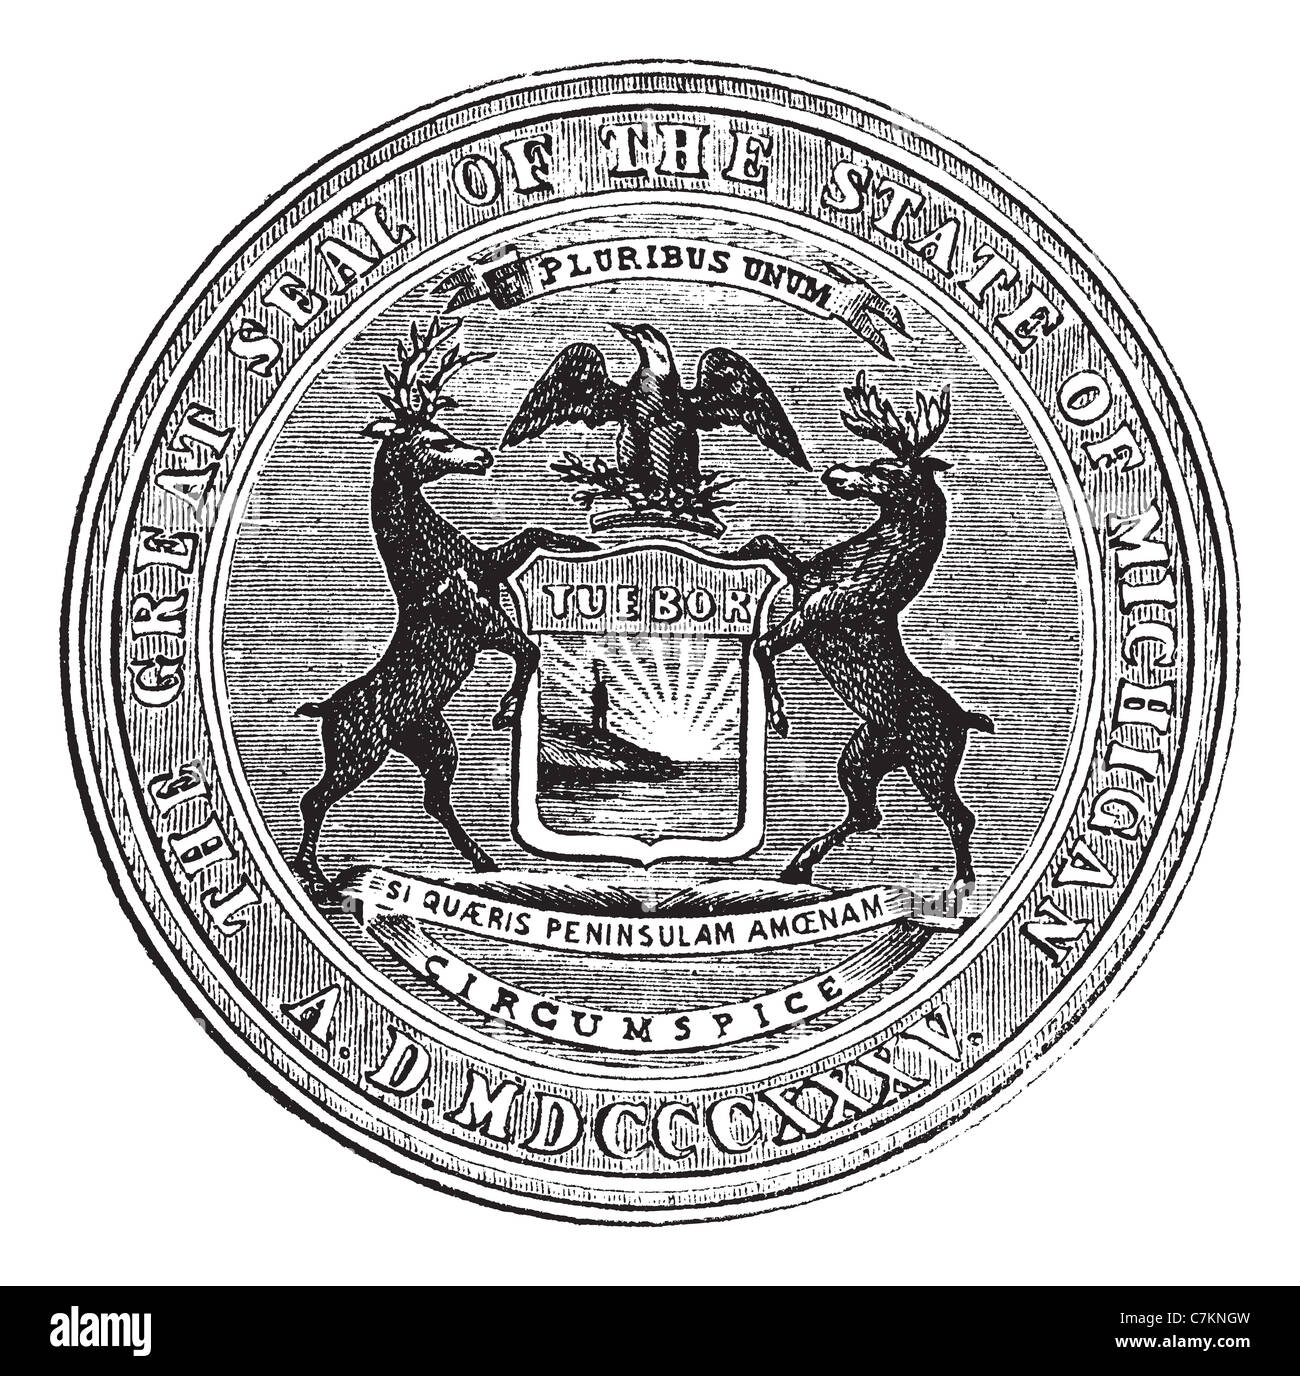 Seal of the state of Michigan, vintage engraved illustration. Trousset encyclopedia (1886 - 1891). Stock Photo